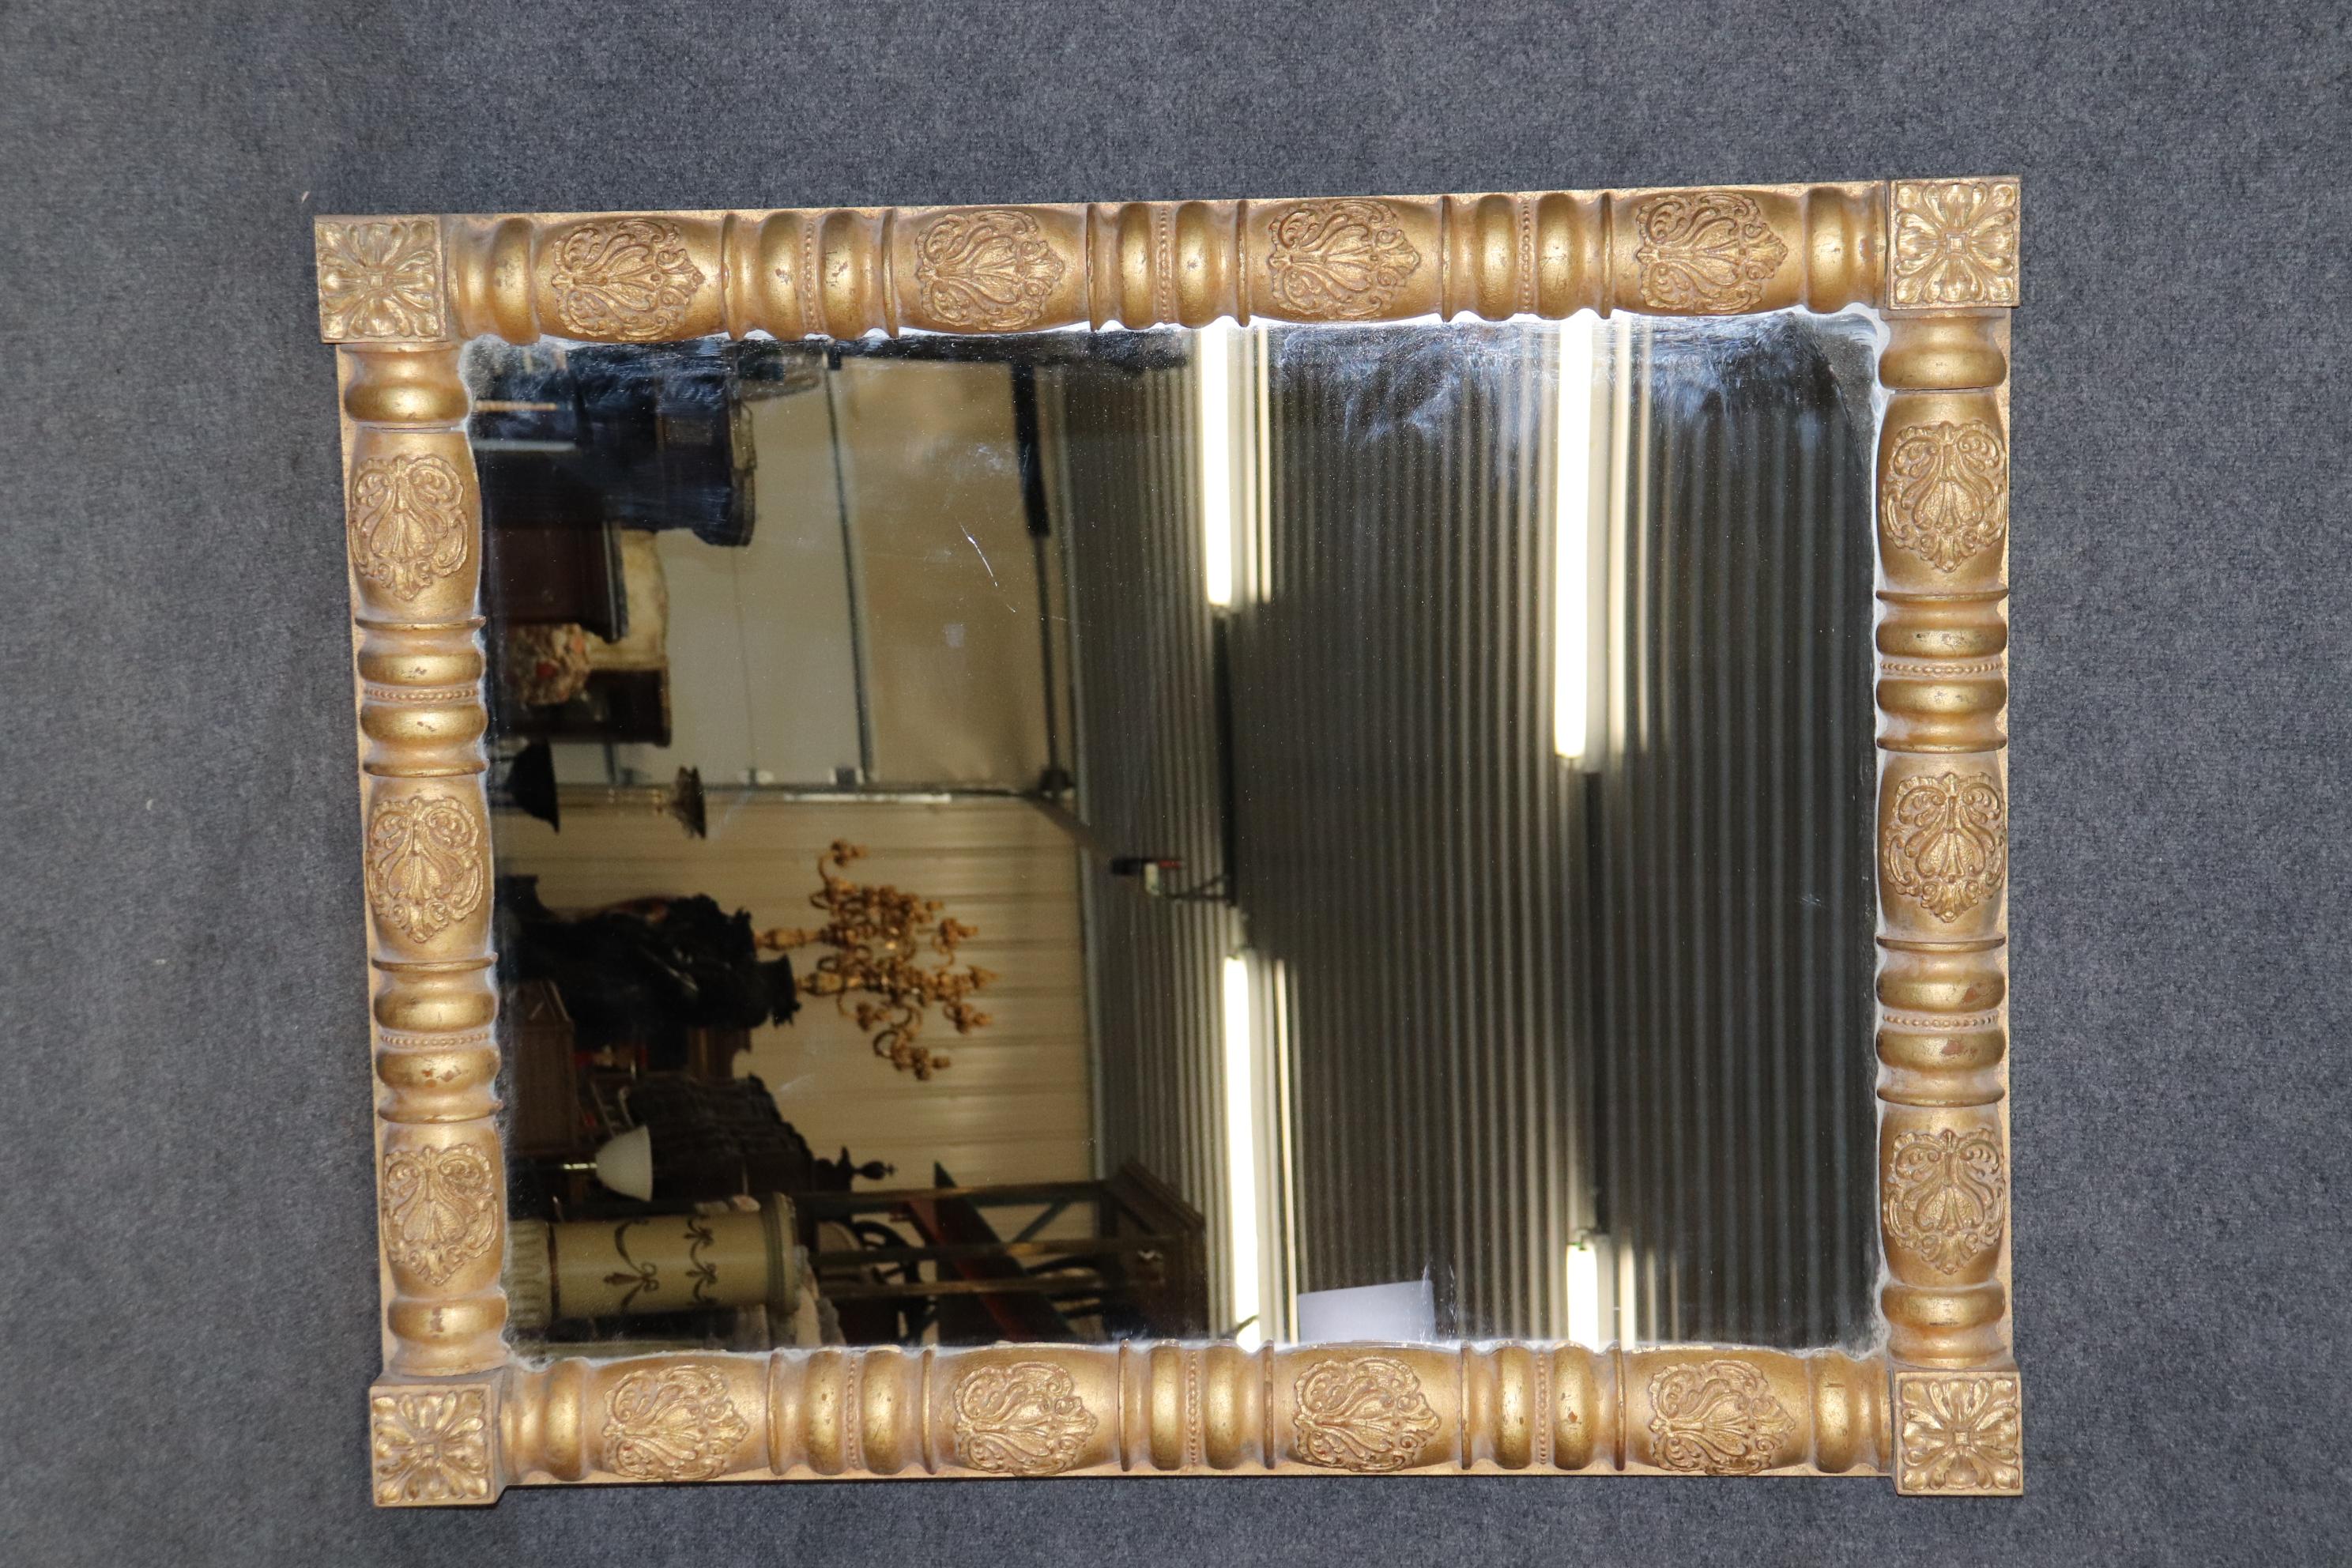 This is a gorgeous mirror by the esteemed company Interiors Inc. The mirror can be hung horizontally or vertically and is already wried this way. The mirror is in good condition with minor signs of age and use but nothing significant. The mirror is